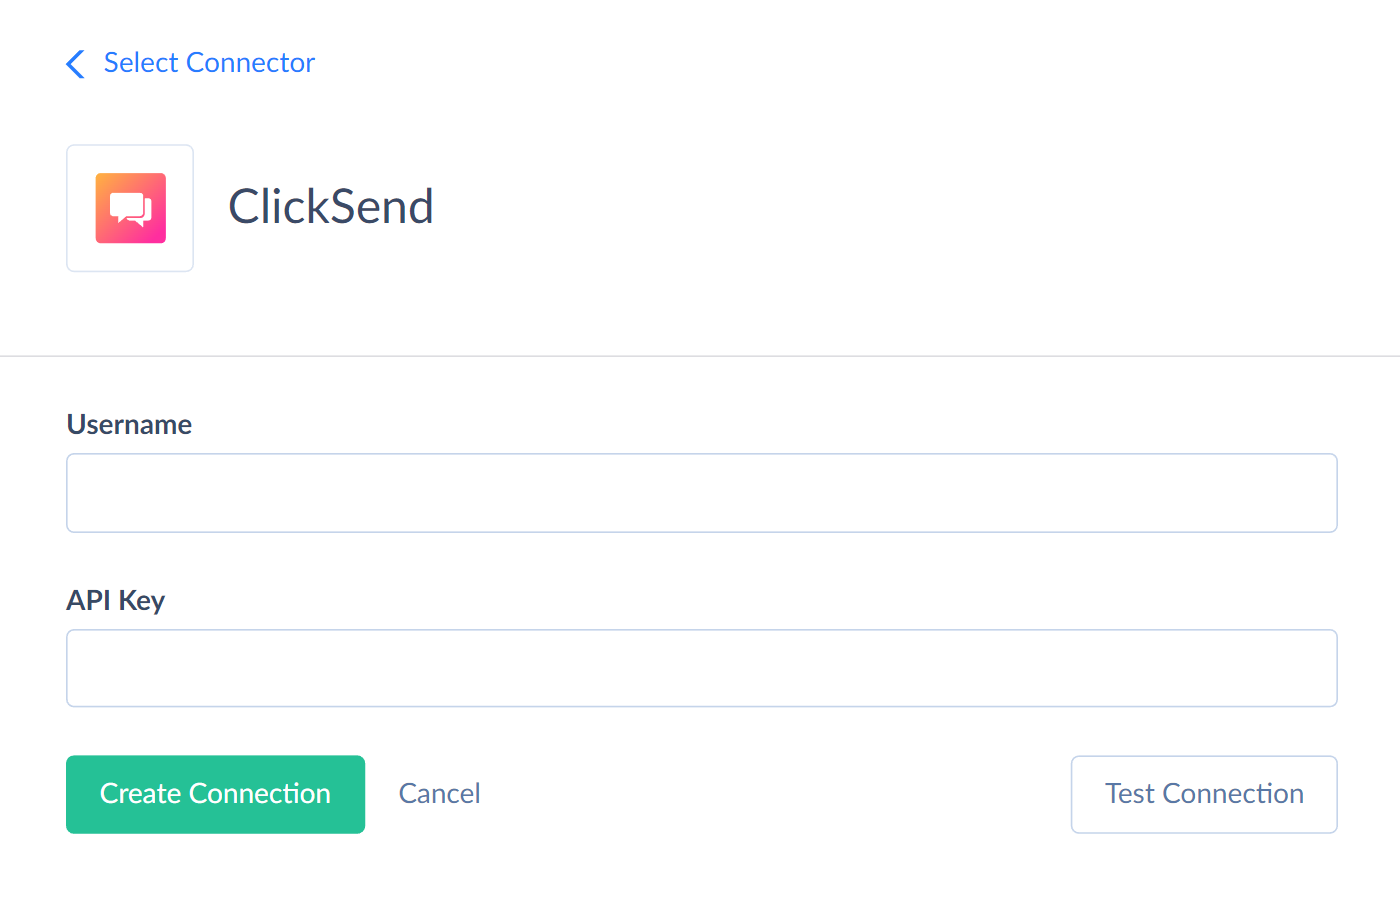 ClickSend connection